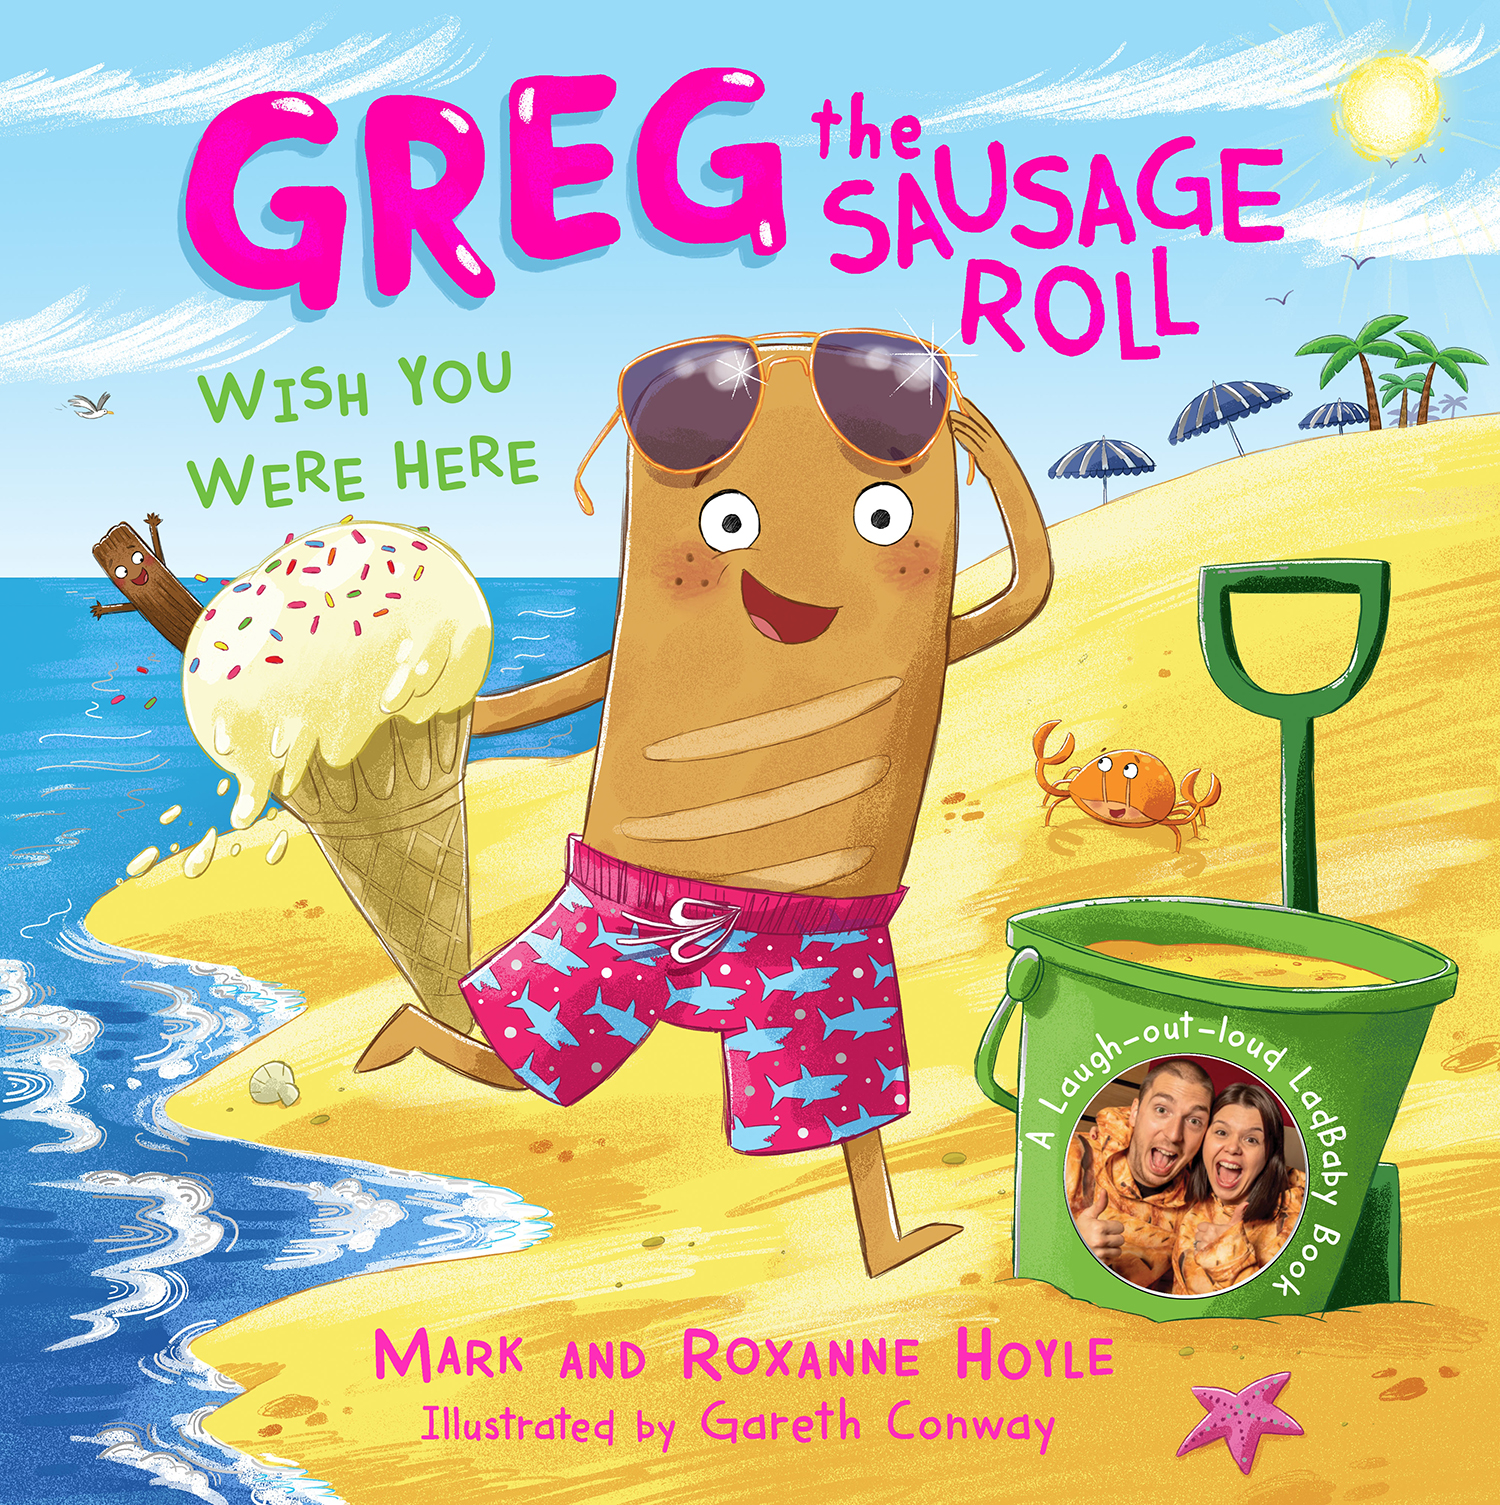 An image of the new Greg the Sausage Roll book cover. It shows an illustration of Greg on a beach, wearing sunglasses and swimming trunks. He is holding an ice cream and is next to a green bucket and spade.